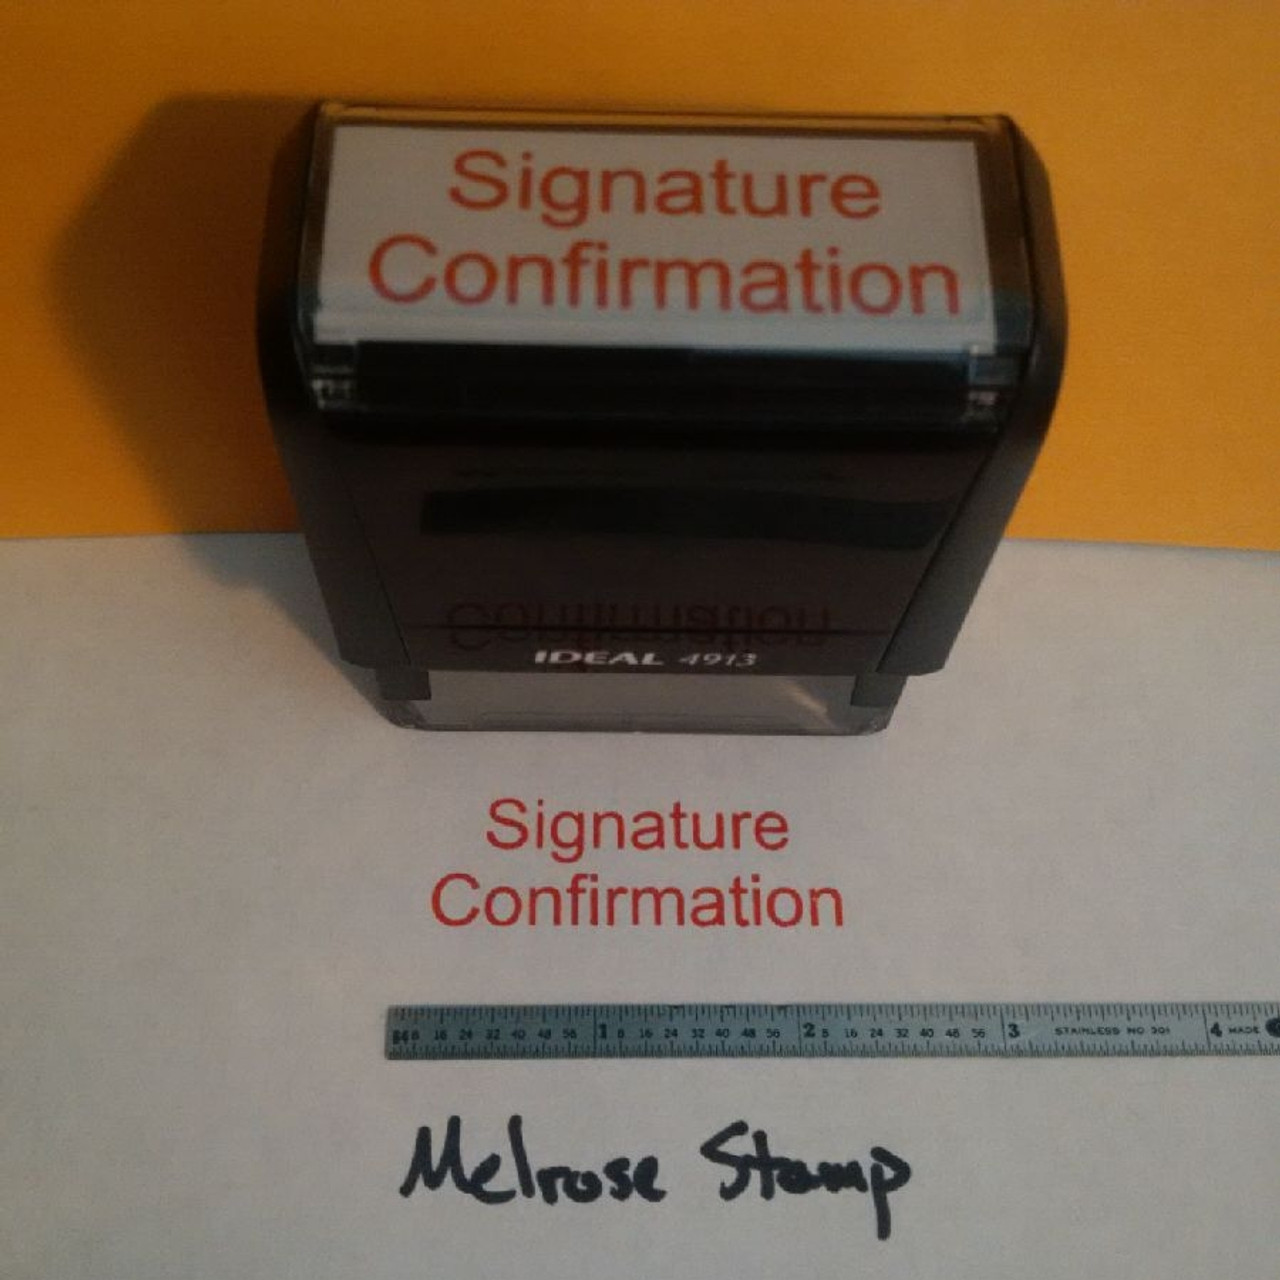 SIGNATURE CONFIRMATION Rubber Stamp for mail use self-inking